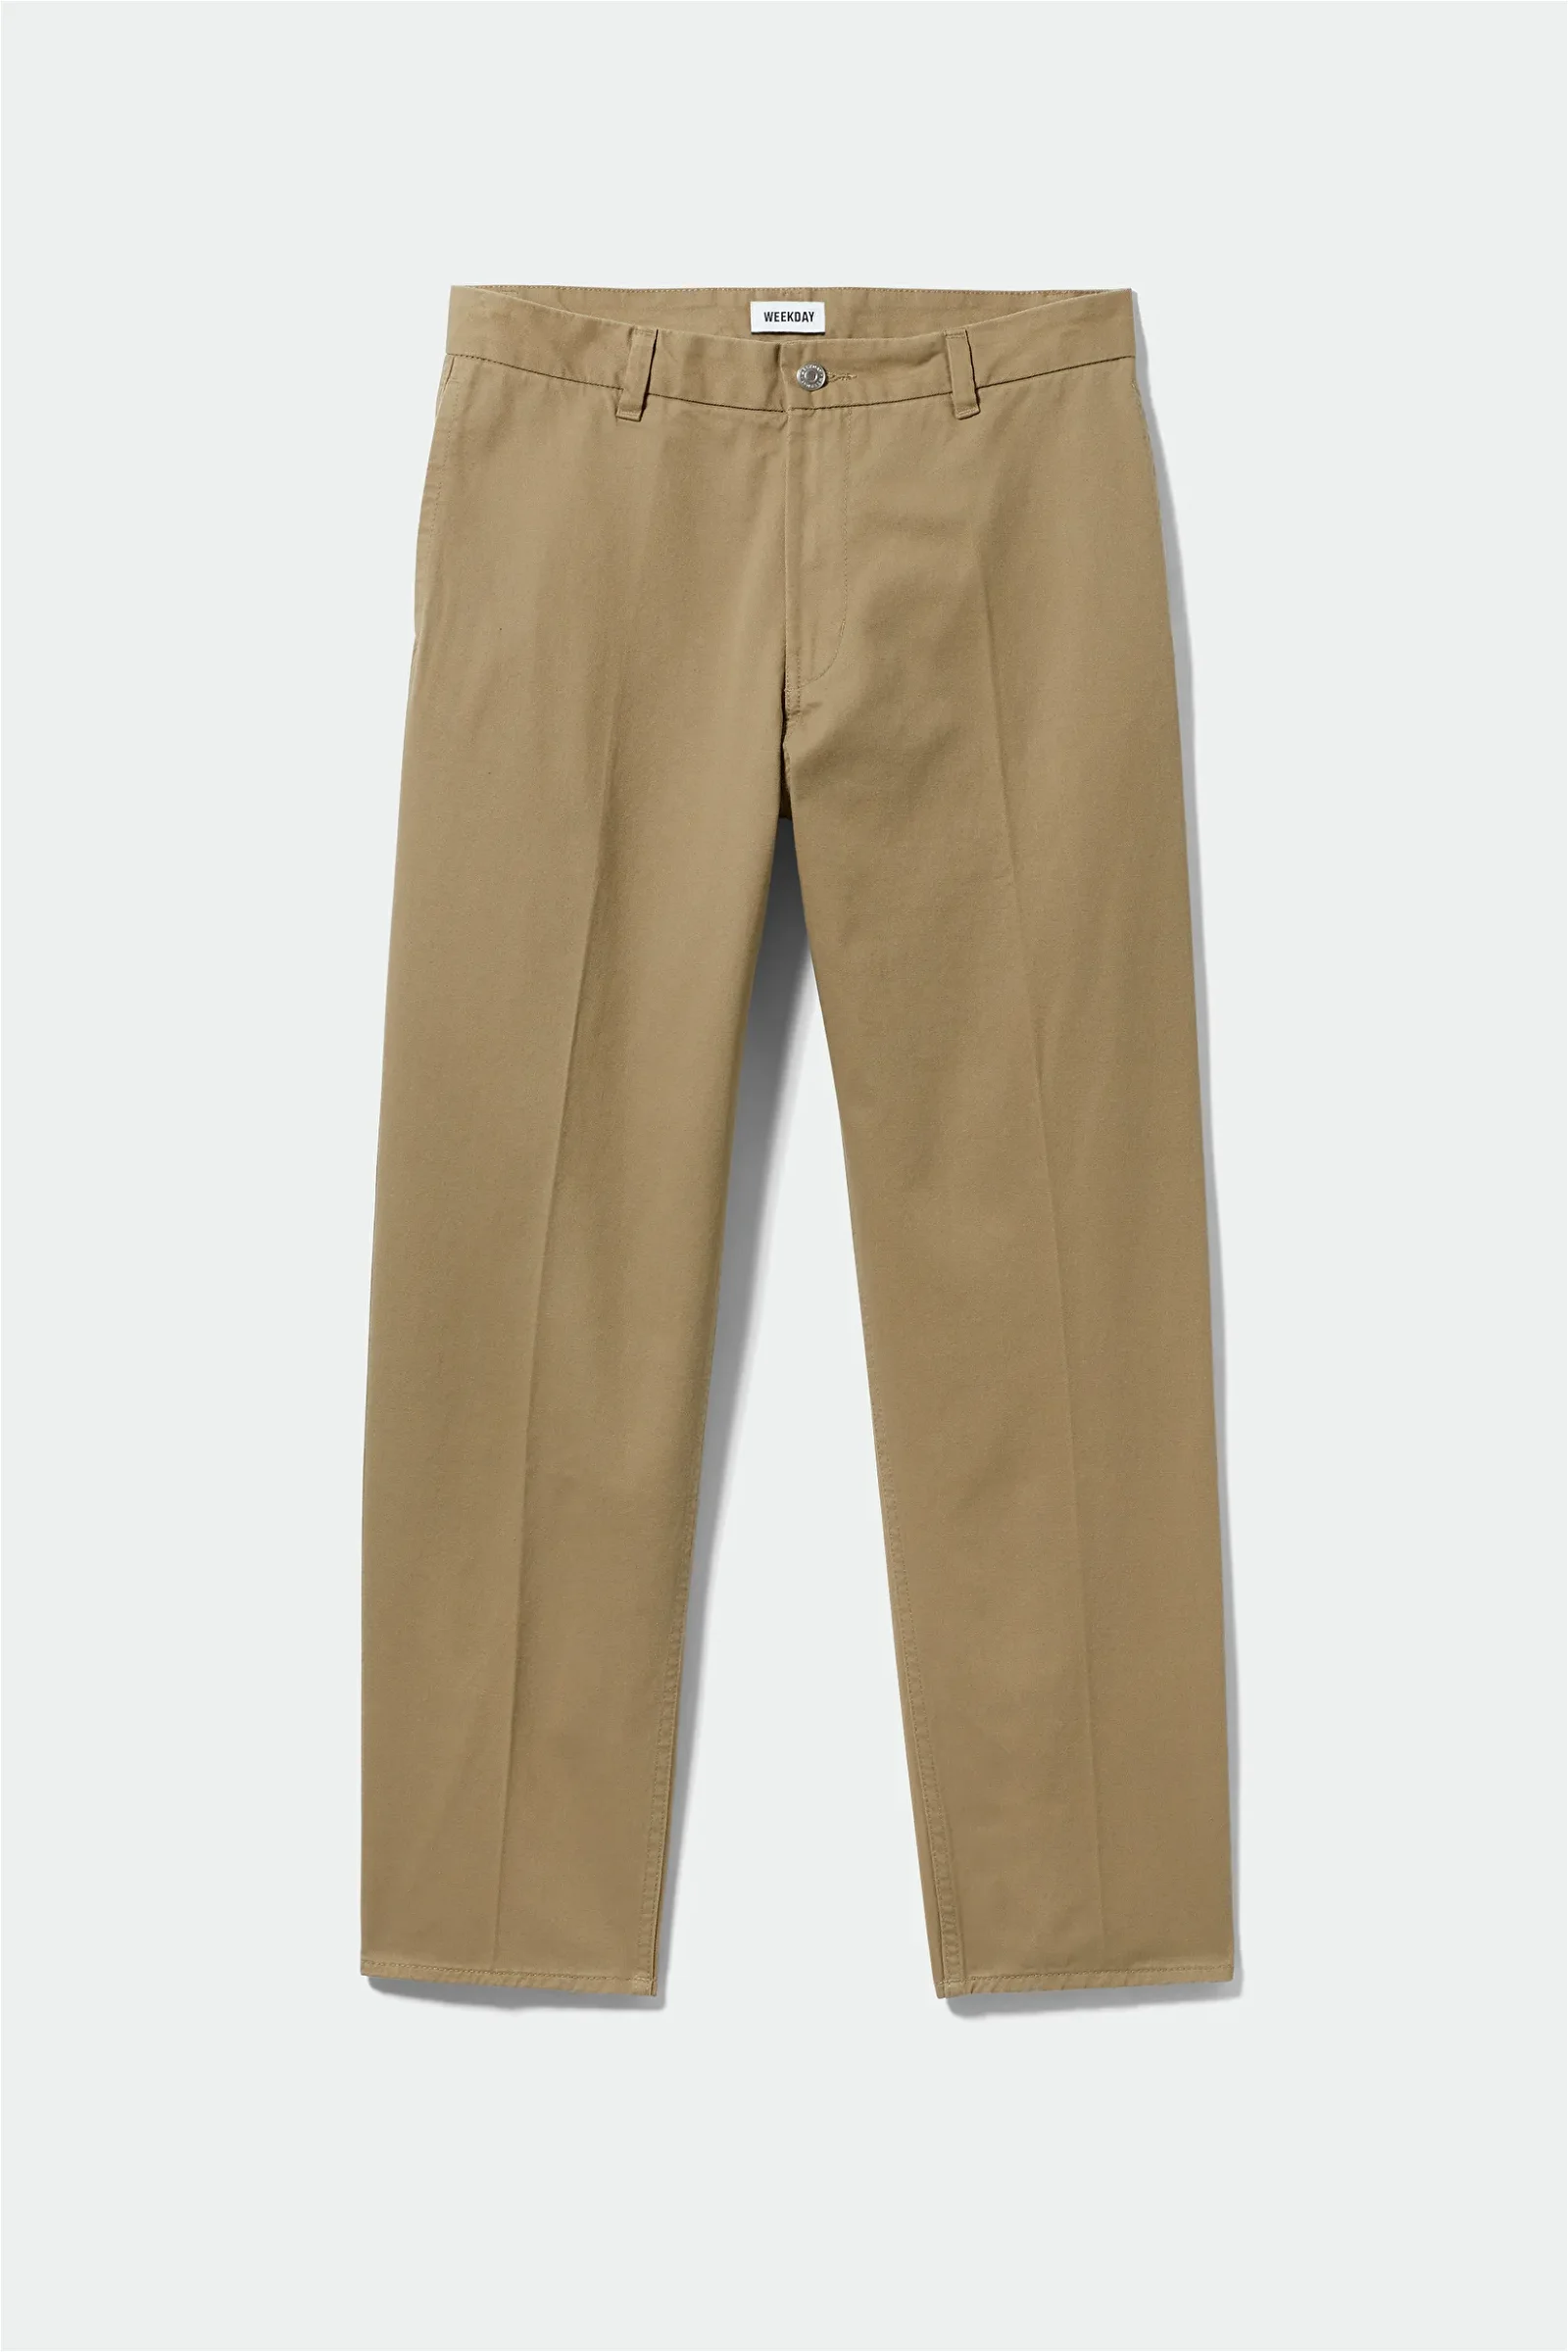 WEEKDAY Tony Tapered Cropped Chinos in Dark beige | Endource